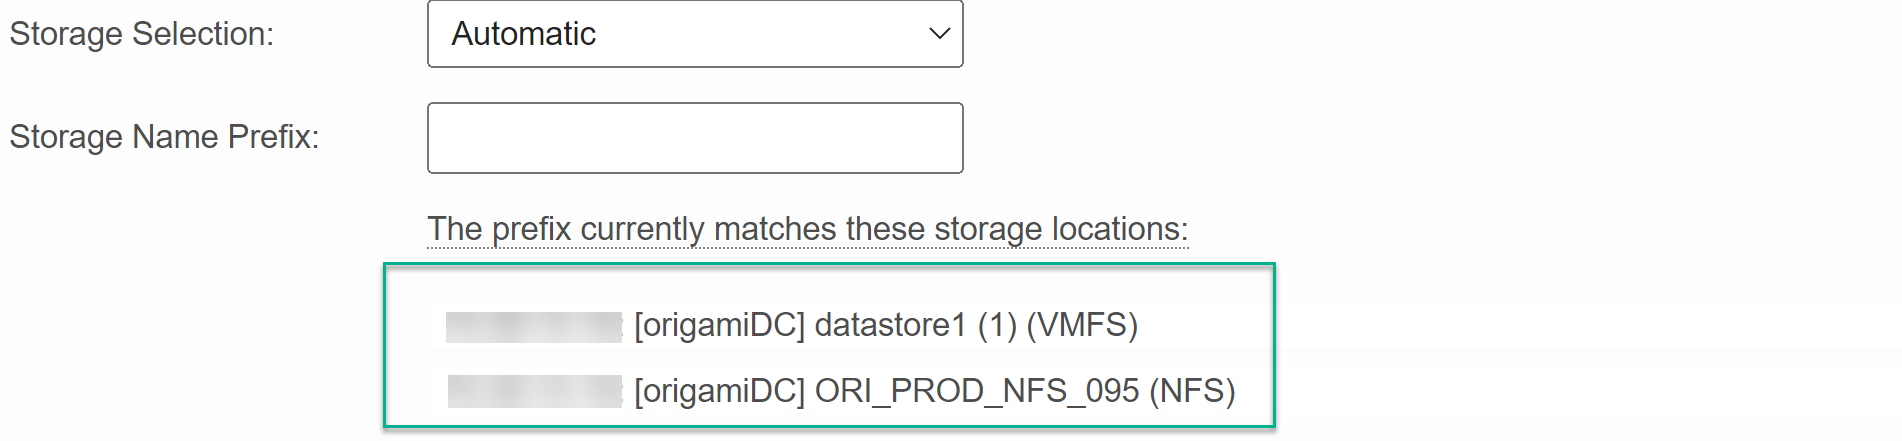 Storage Name Prefix is left blank and all possible storage locations are listed.